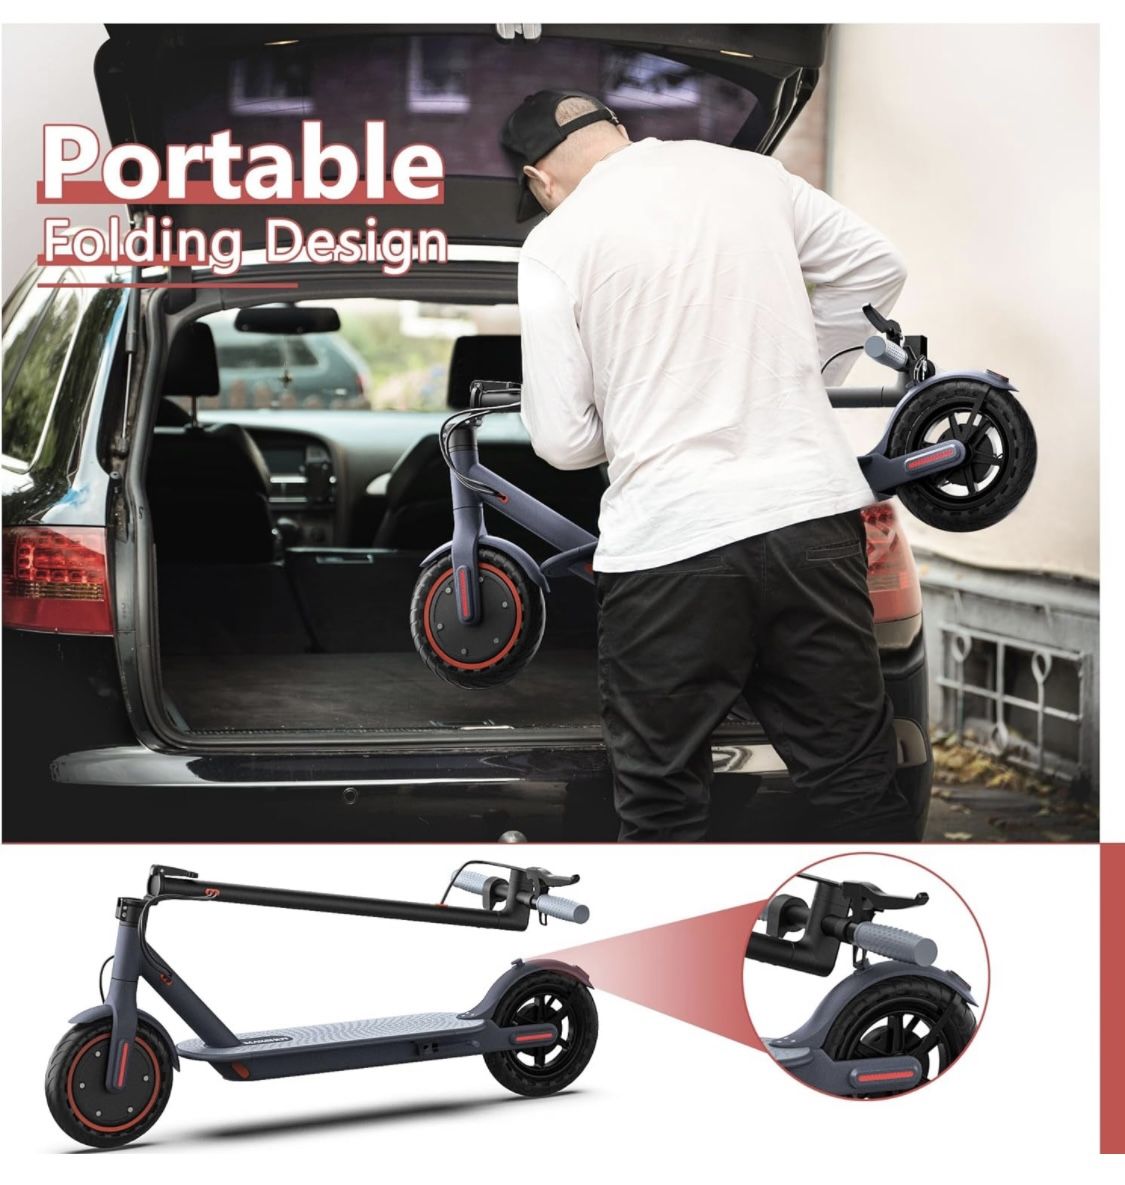 Electric Scooter - 8.5" Solid Tires, Quadruple Shock Absorption, Up to 19 Miles Long-Range, 19 Mph Top Speed, Portable Folding Commuting Scooter for A